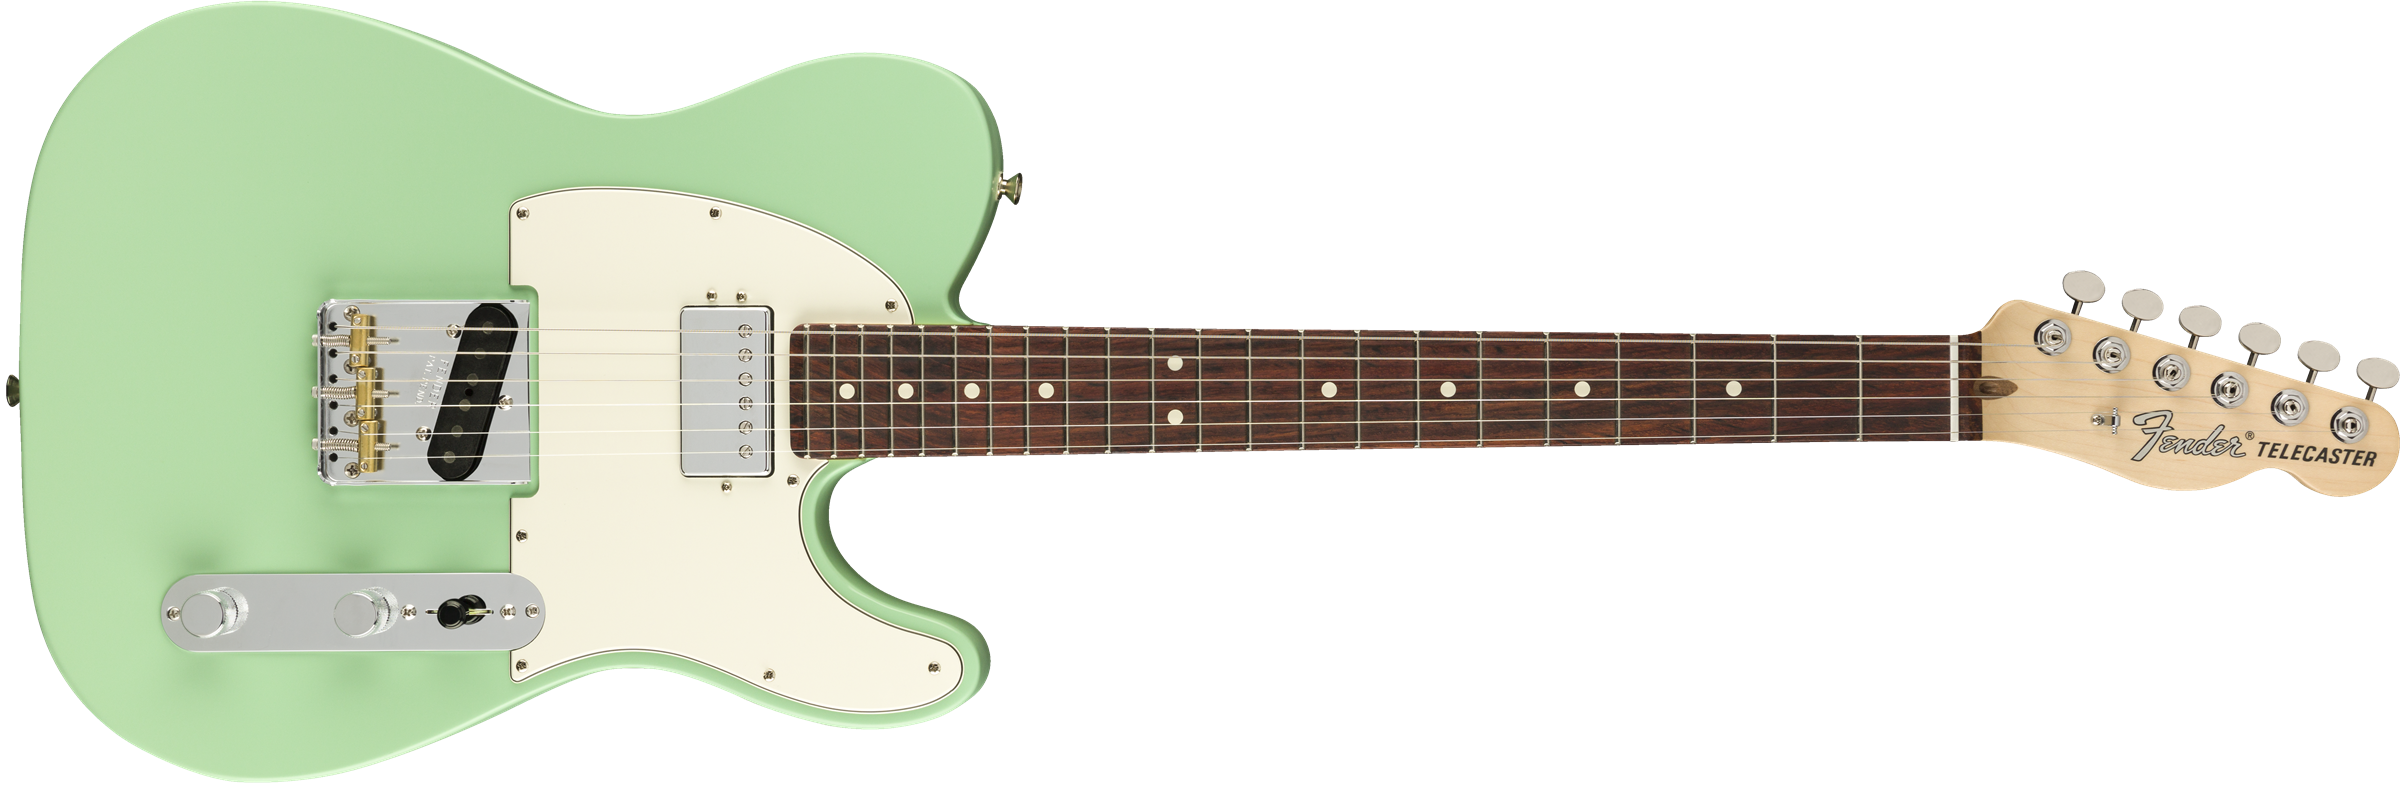 Fender American Performer Telecaster with Humbucking Rosewood Fingerboard - Satin Surf Green 0115120357